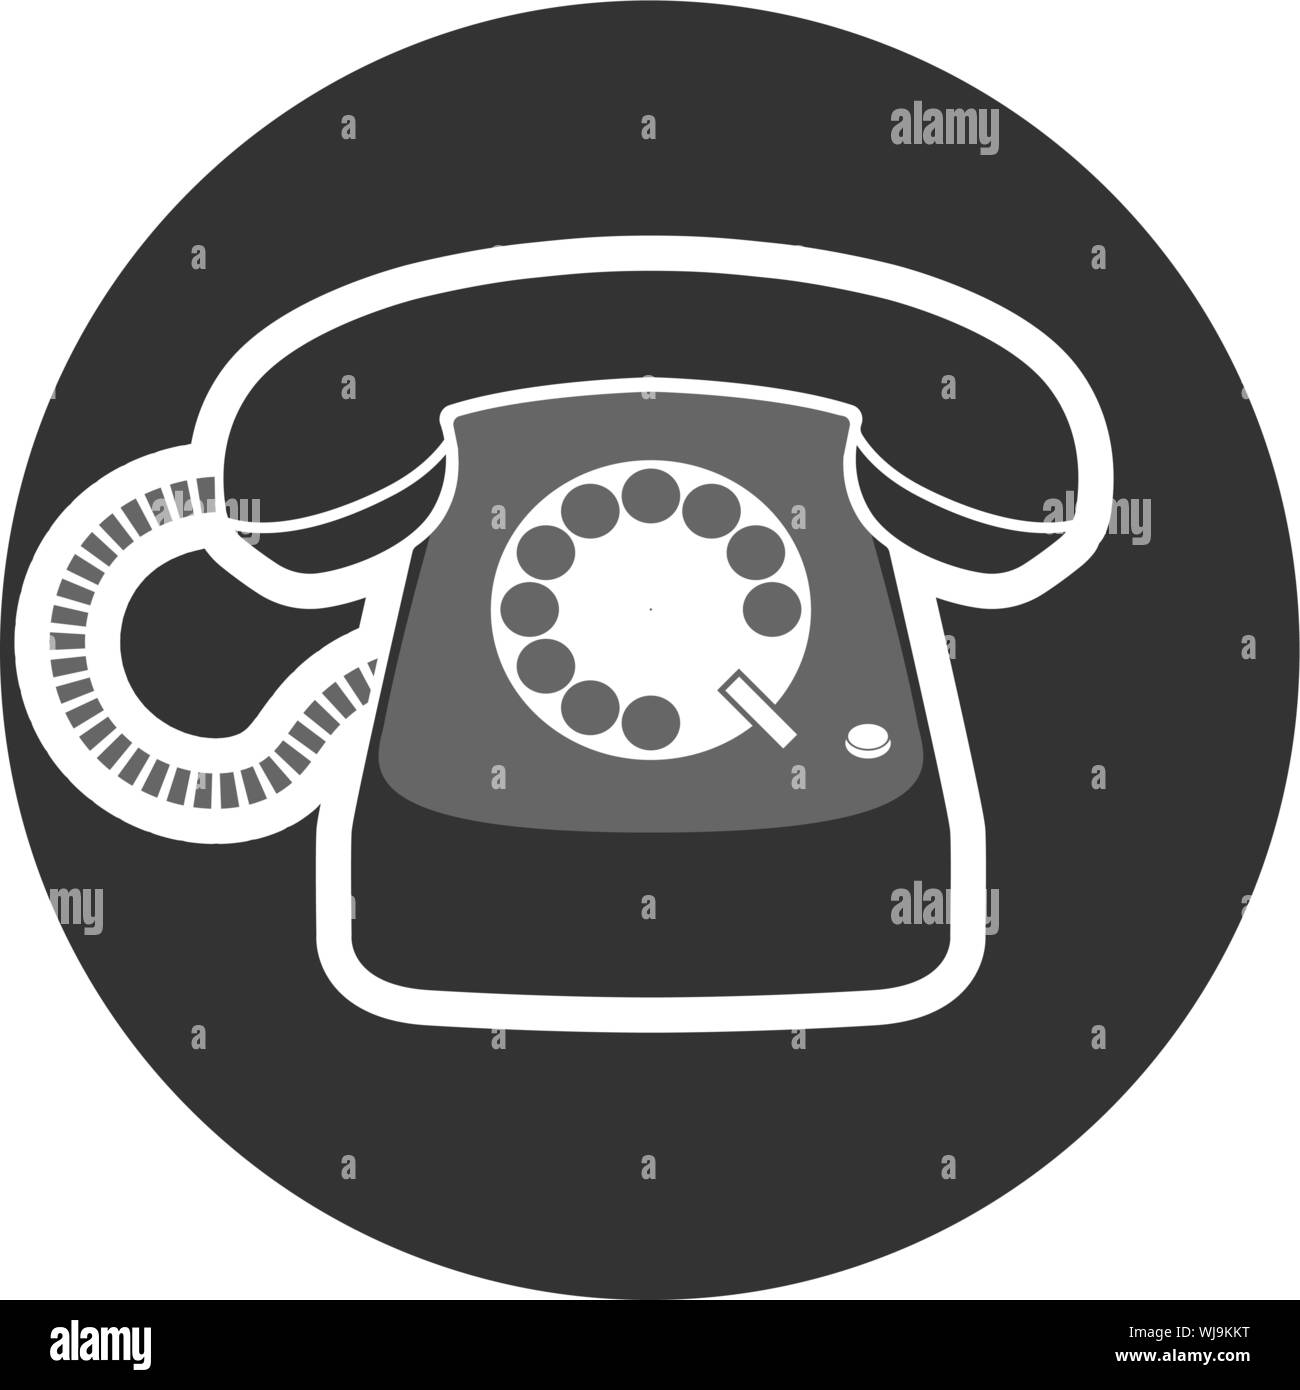 rotary dial operated telephone icon or symbol vector illustration Stock Vector